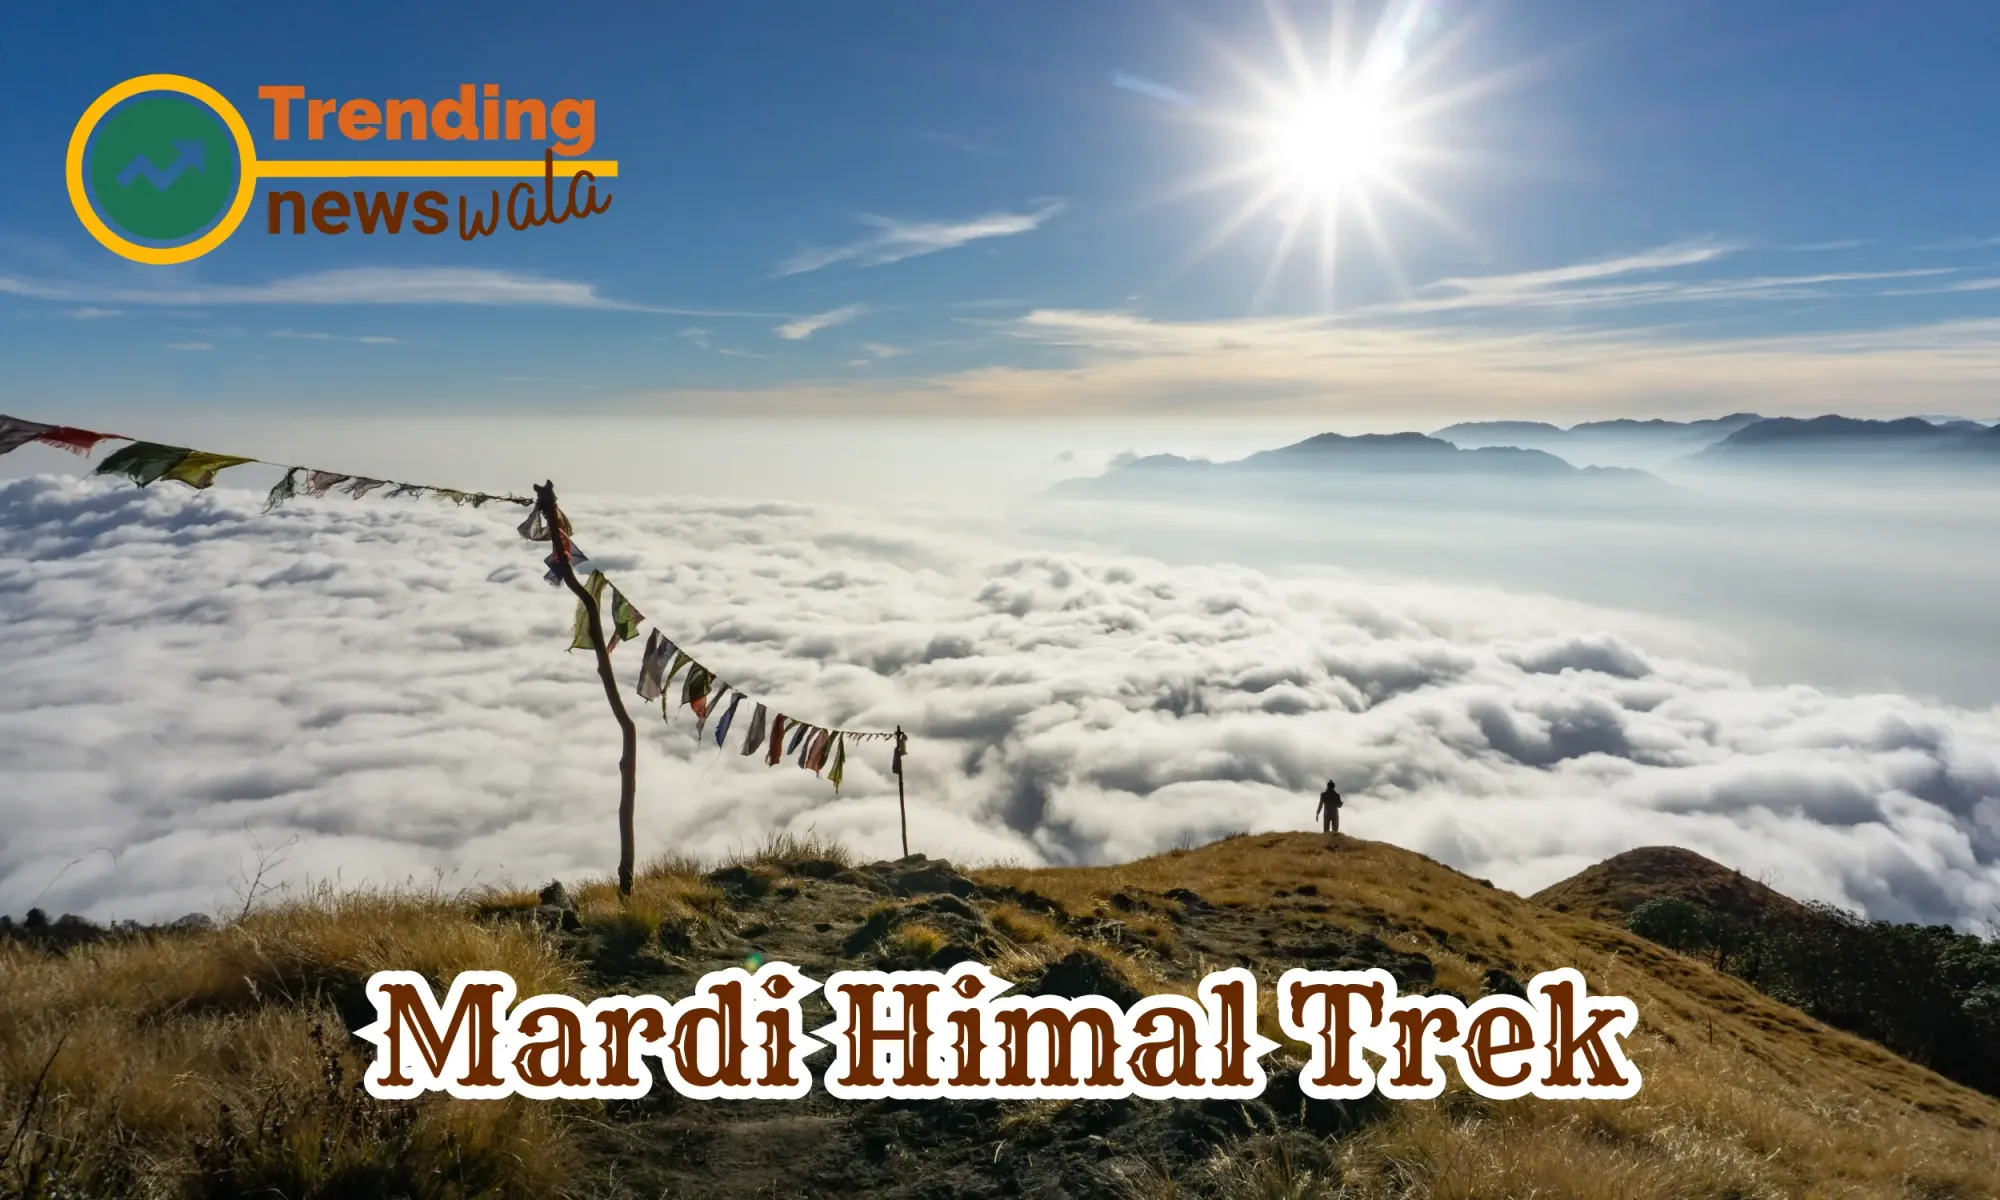 The Mardi Himal Trek is a relatively new and increasingly popular trekking route in the Annapurna region of Nepal